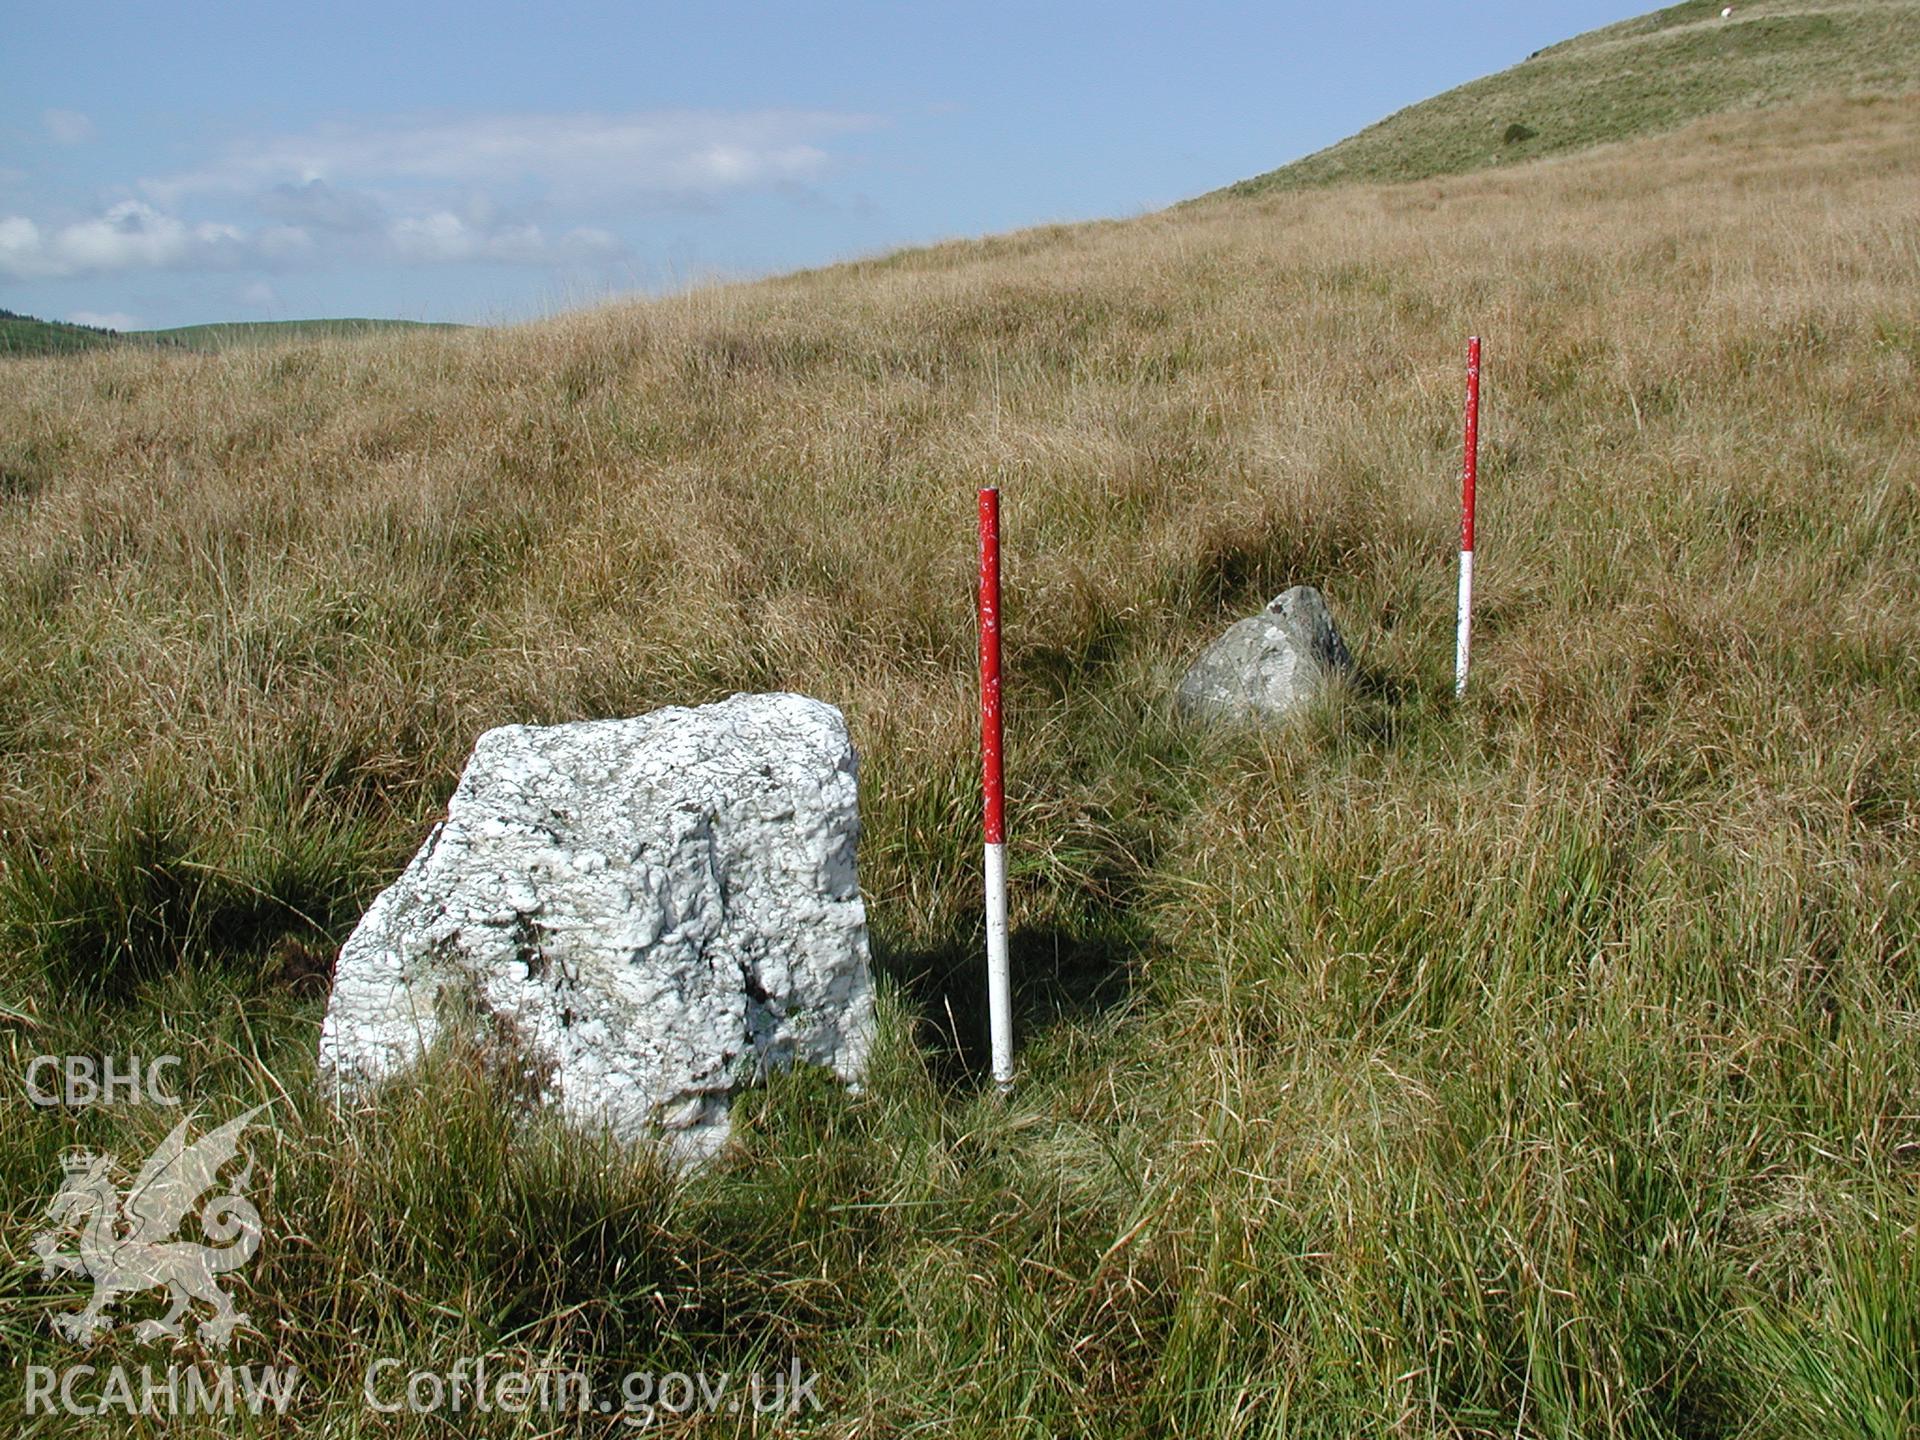 Photograph of Disgwylfa Fach Stone Row taken on 24/10/2004 by R.S. Jones during an Upland Survey undertaken by Cambrian Archaeological Projects.